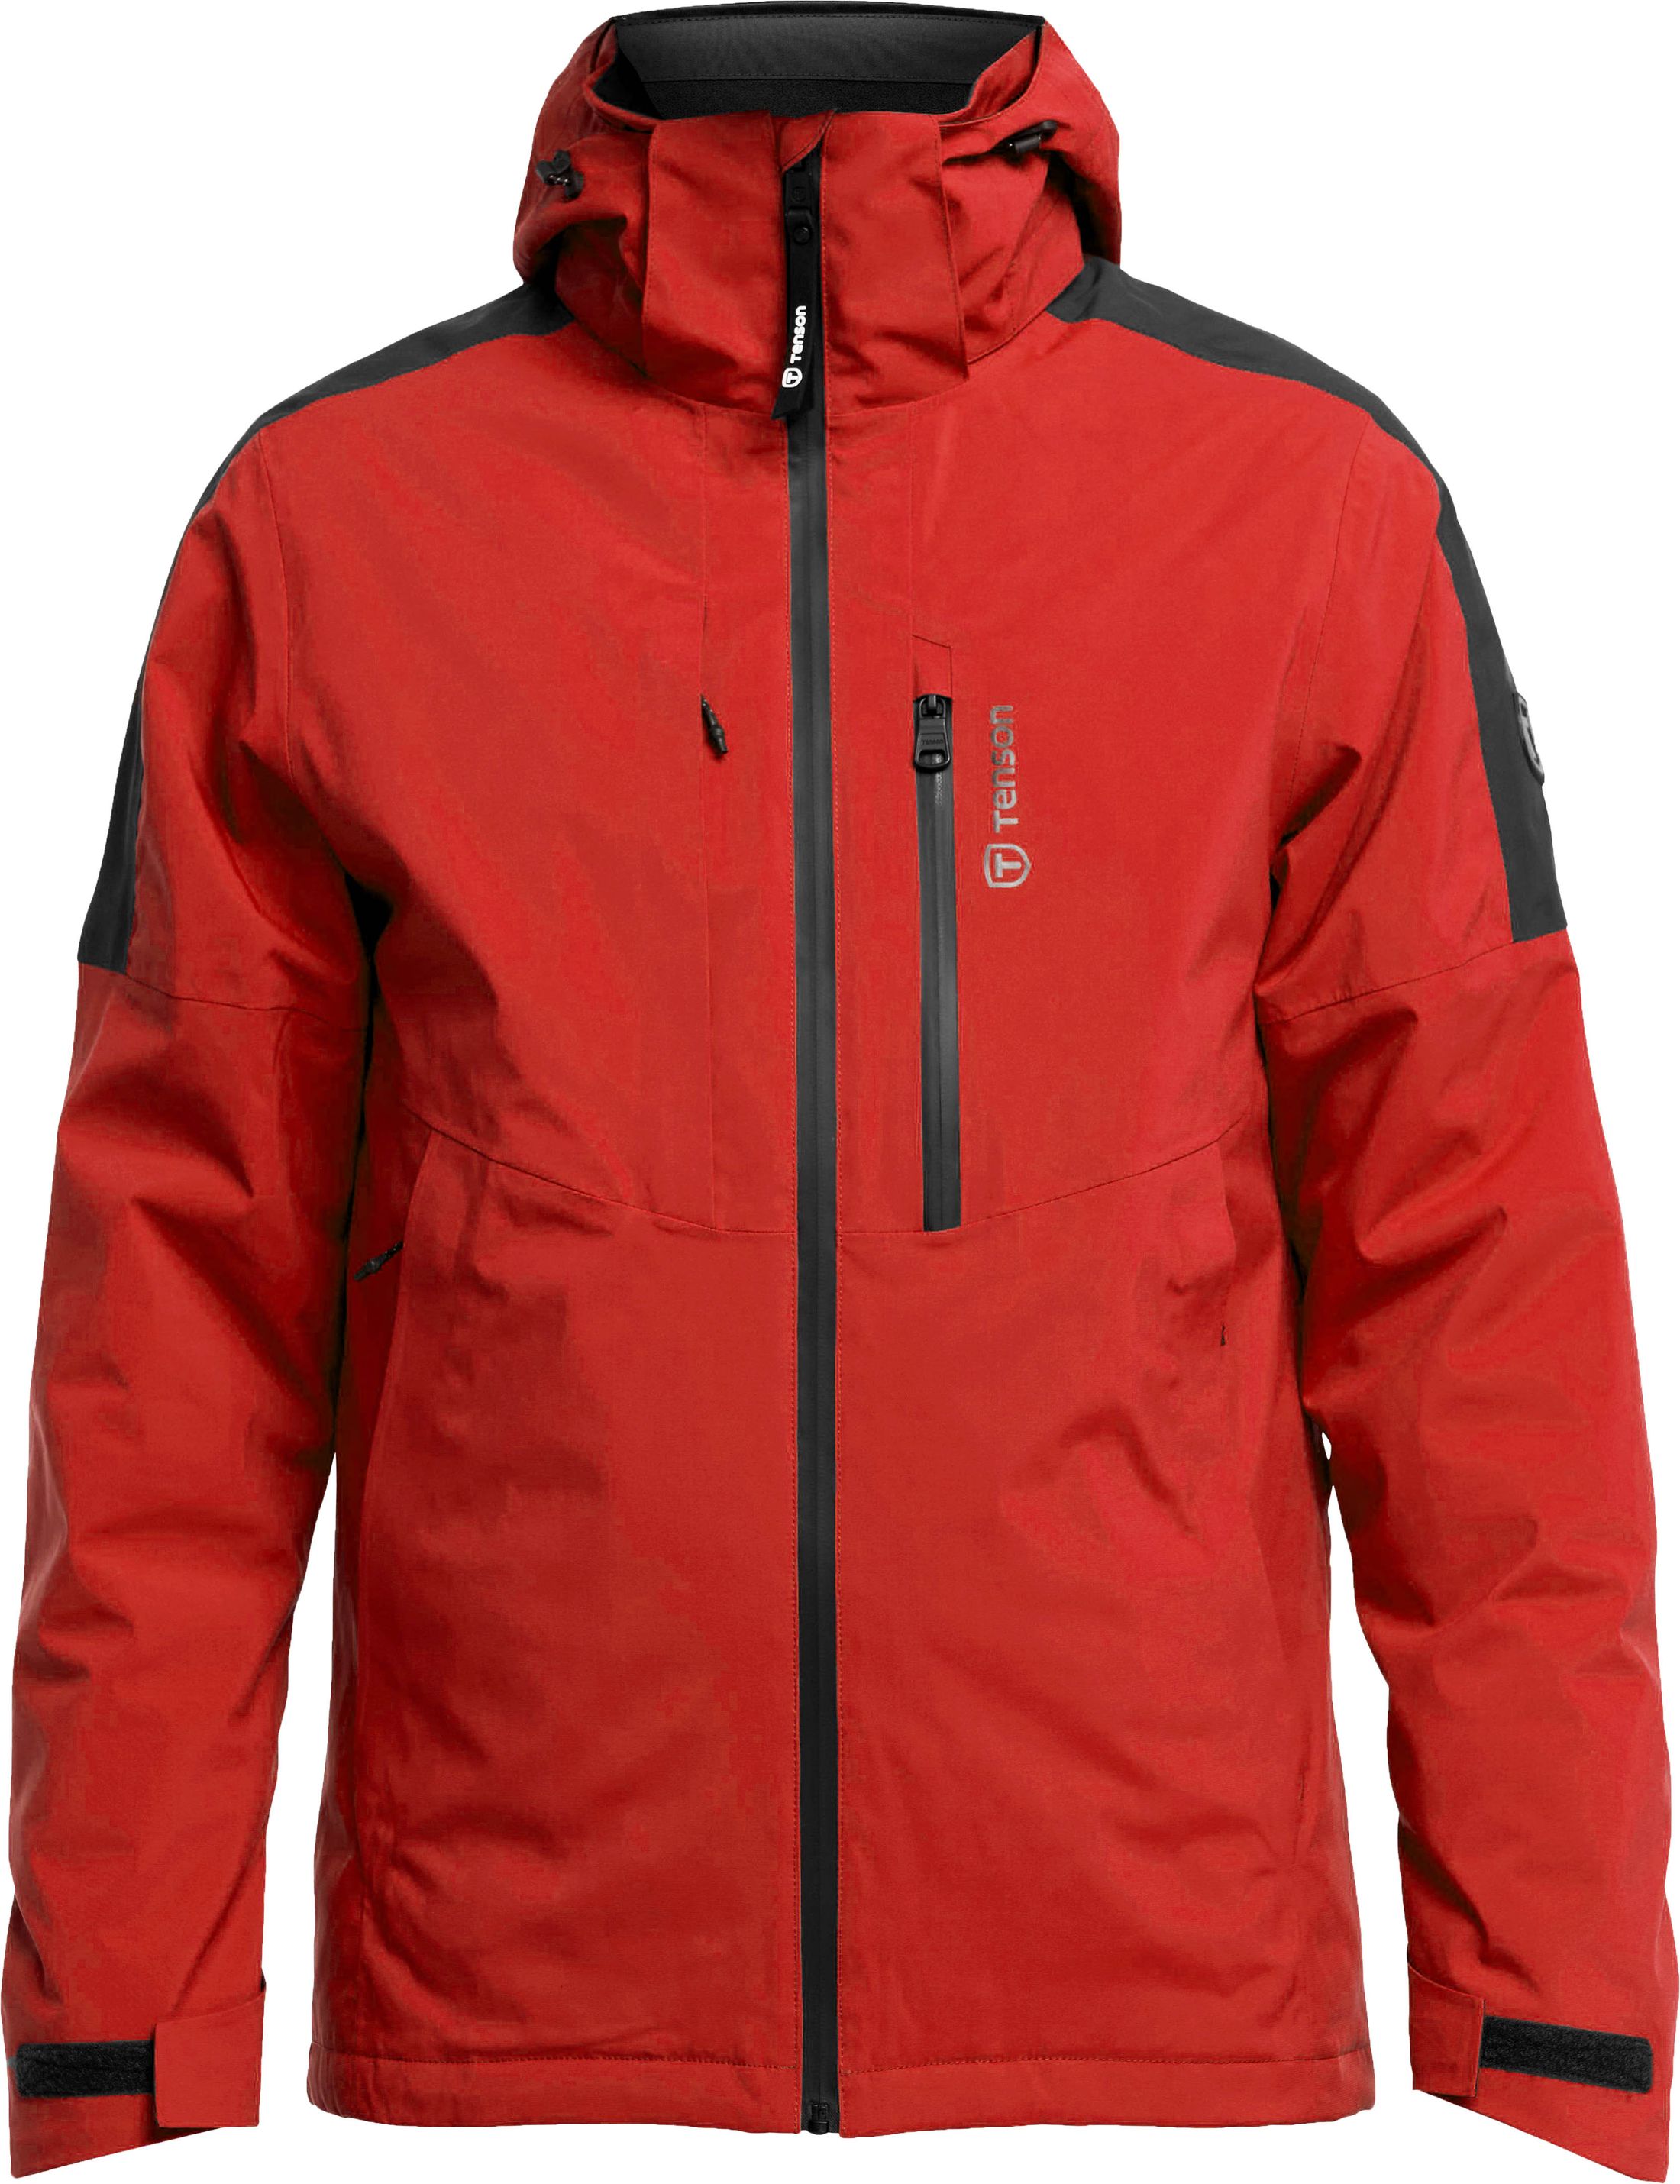 Tenson Jacket Core MPC Extreme Red size M